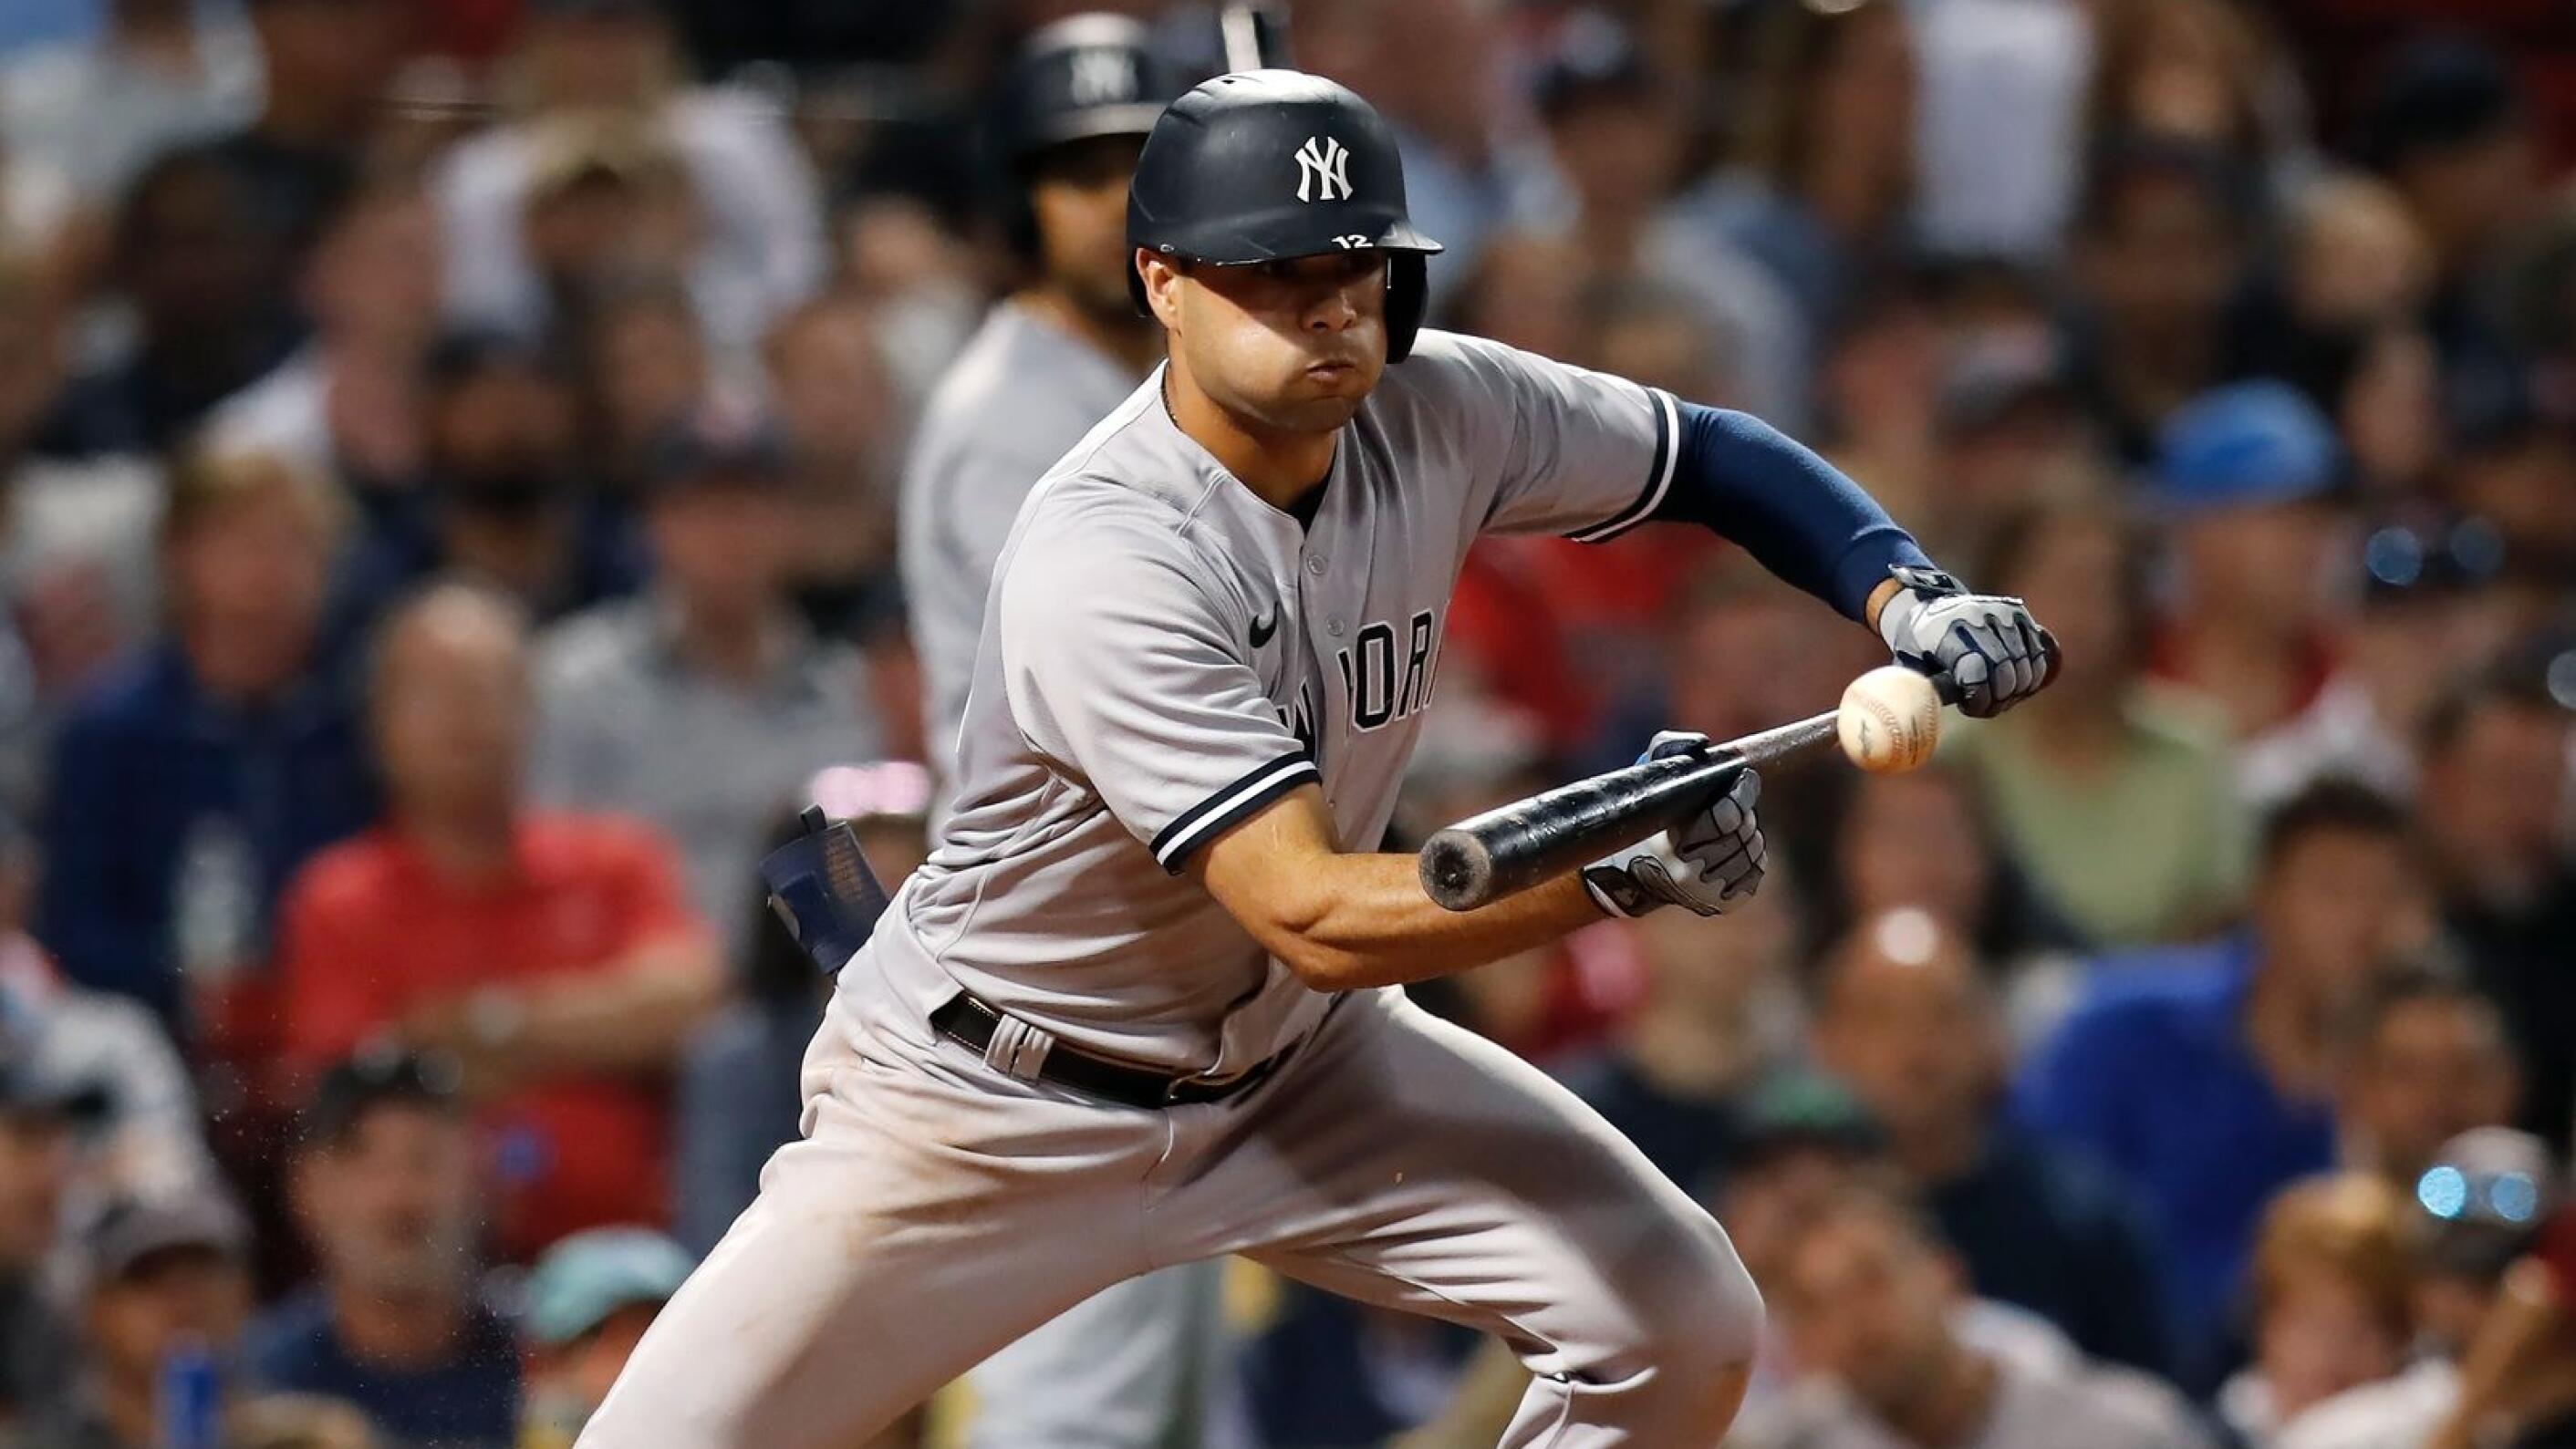 Kiner-Falefa helps Yankees squeeze past Red Sox 3-2